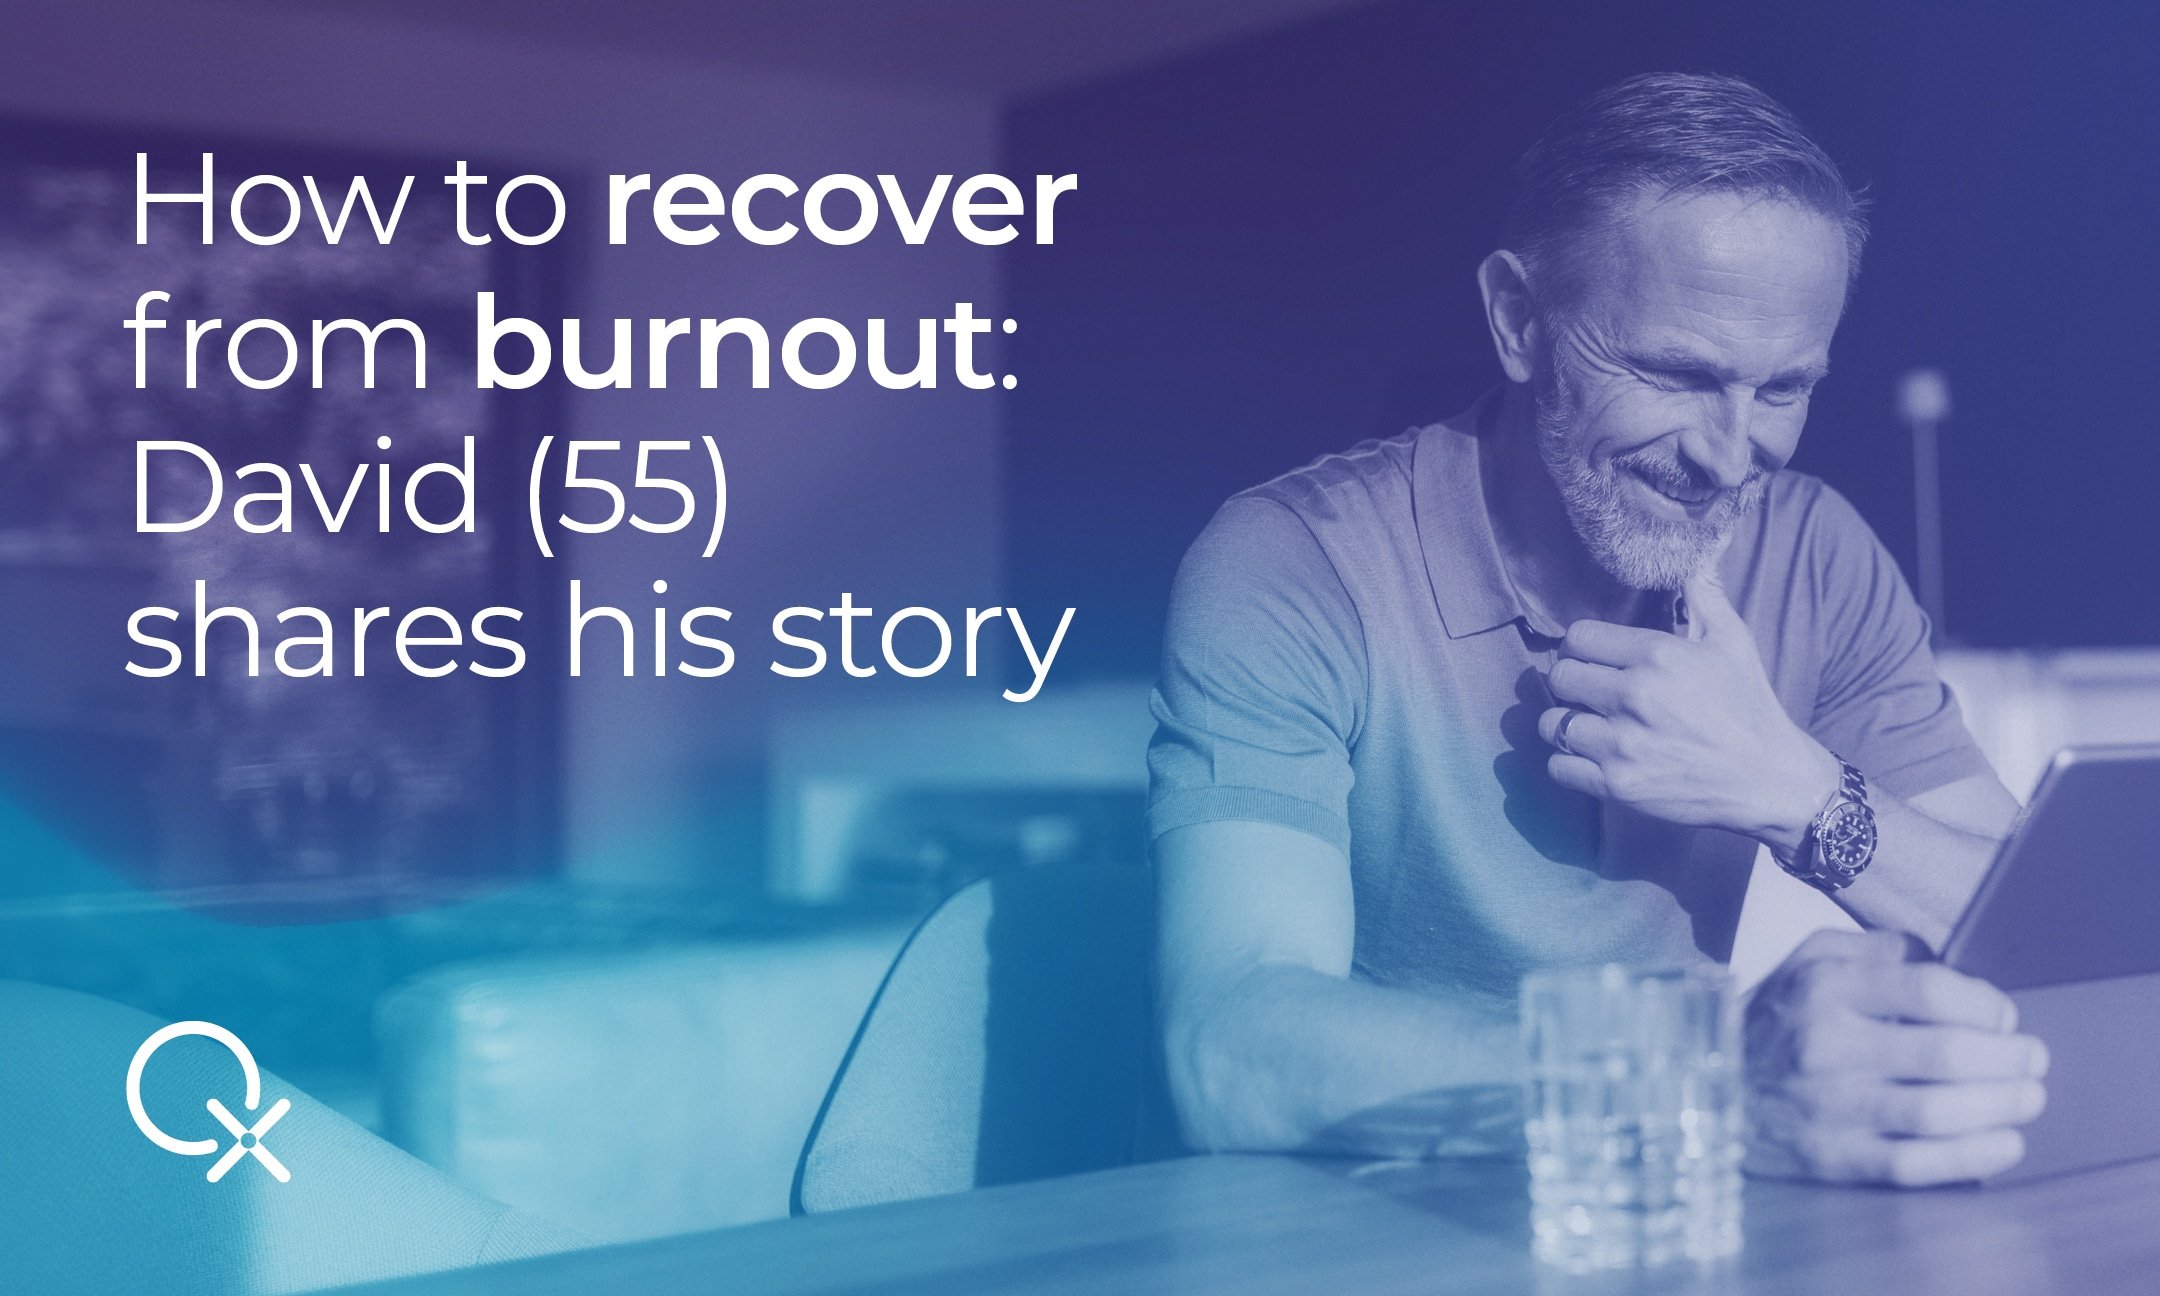 Quantum biofeedback helped David recover from burnout and rediscover the joy of a balanced and fulfilling life.